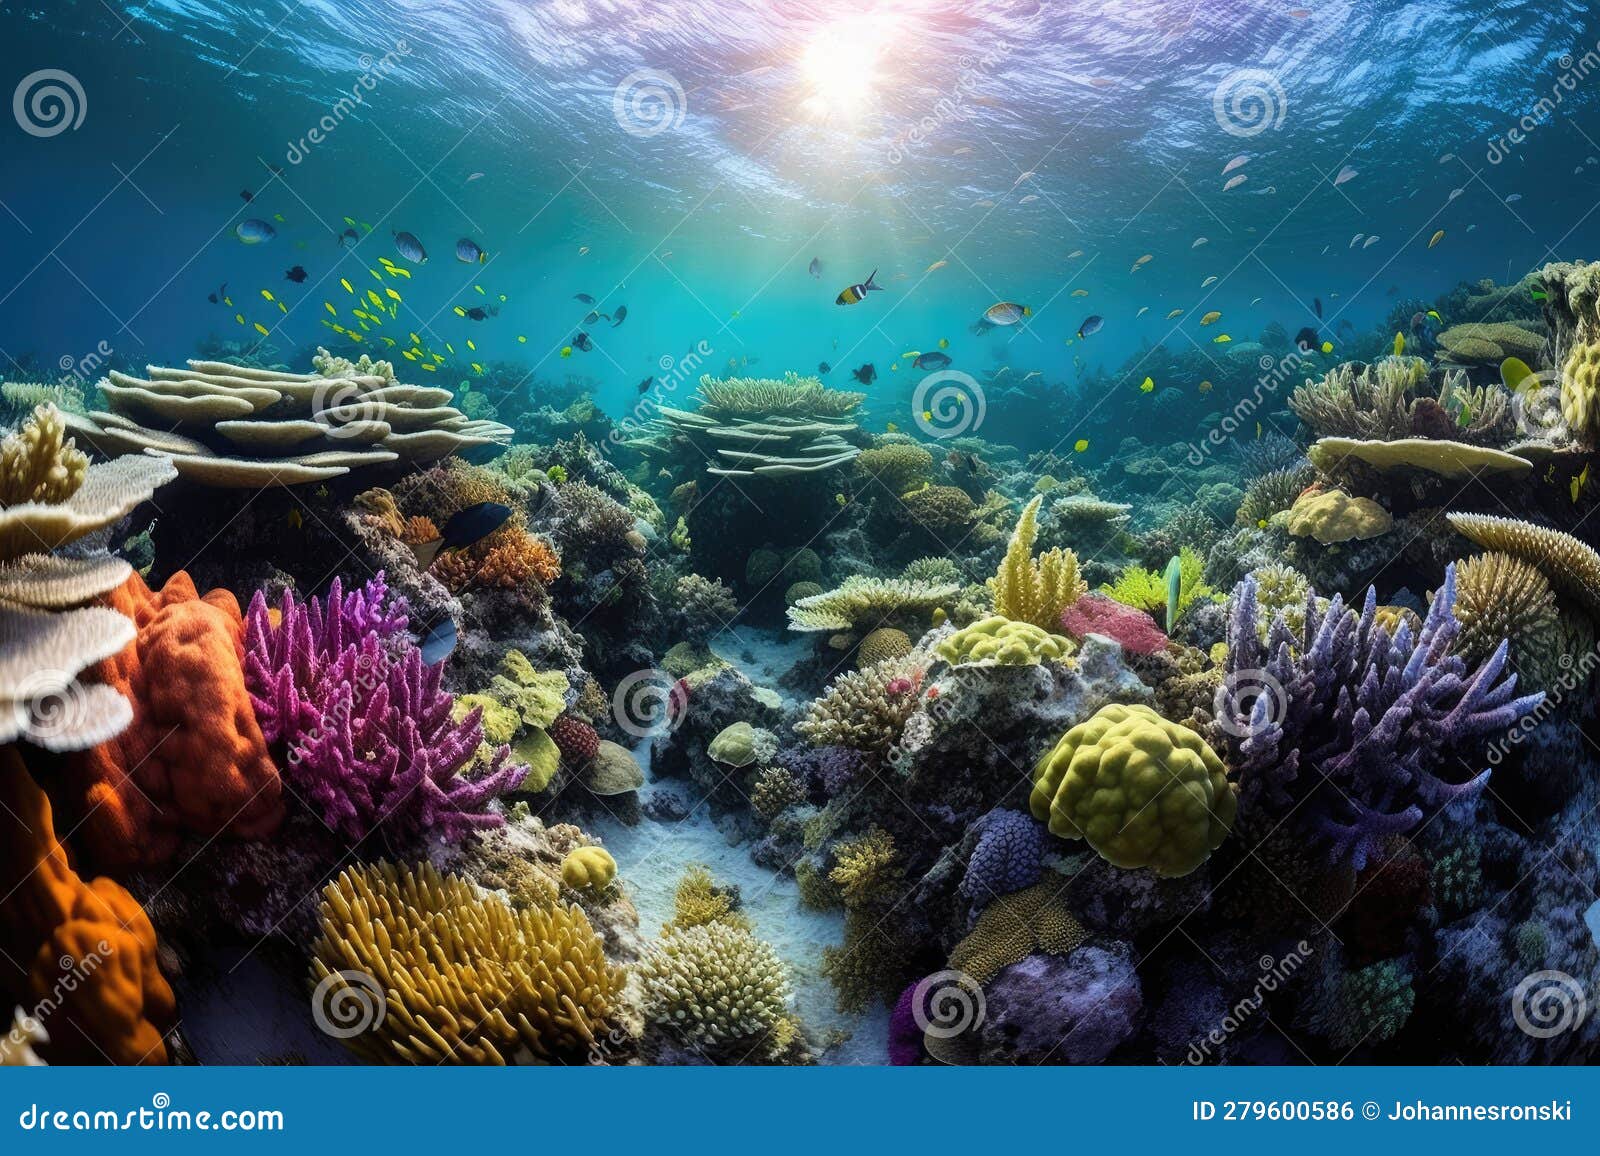 Vibrant Coral Reef Teeming with Colorful Fish and Plants in Dreamy ...